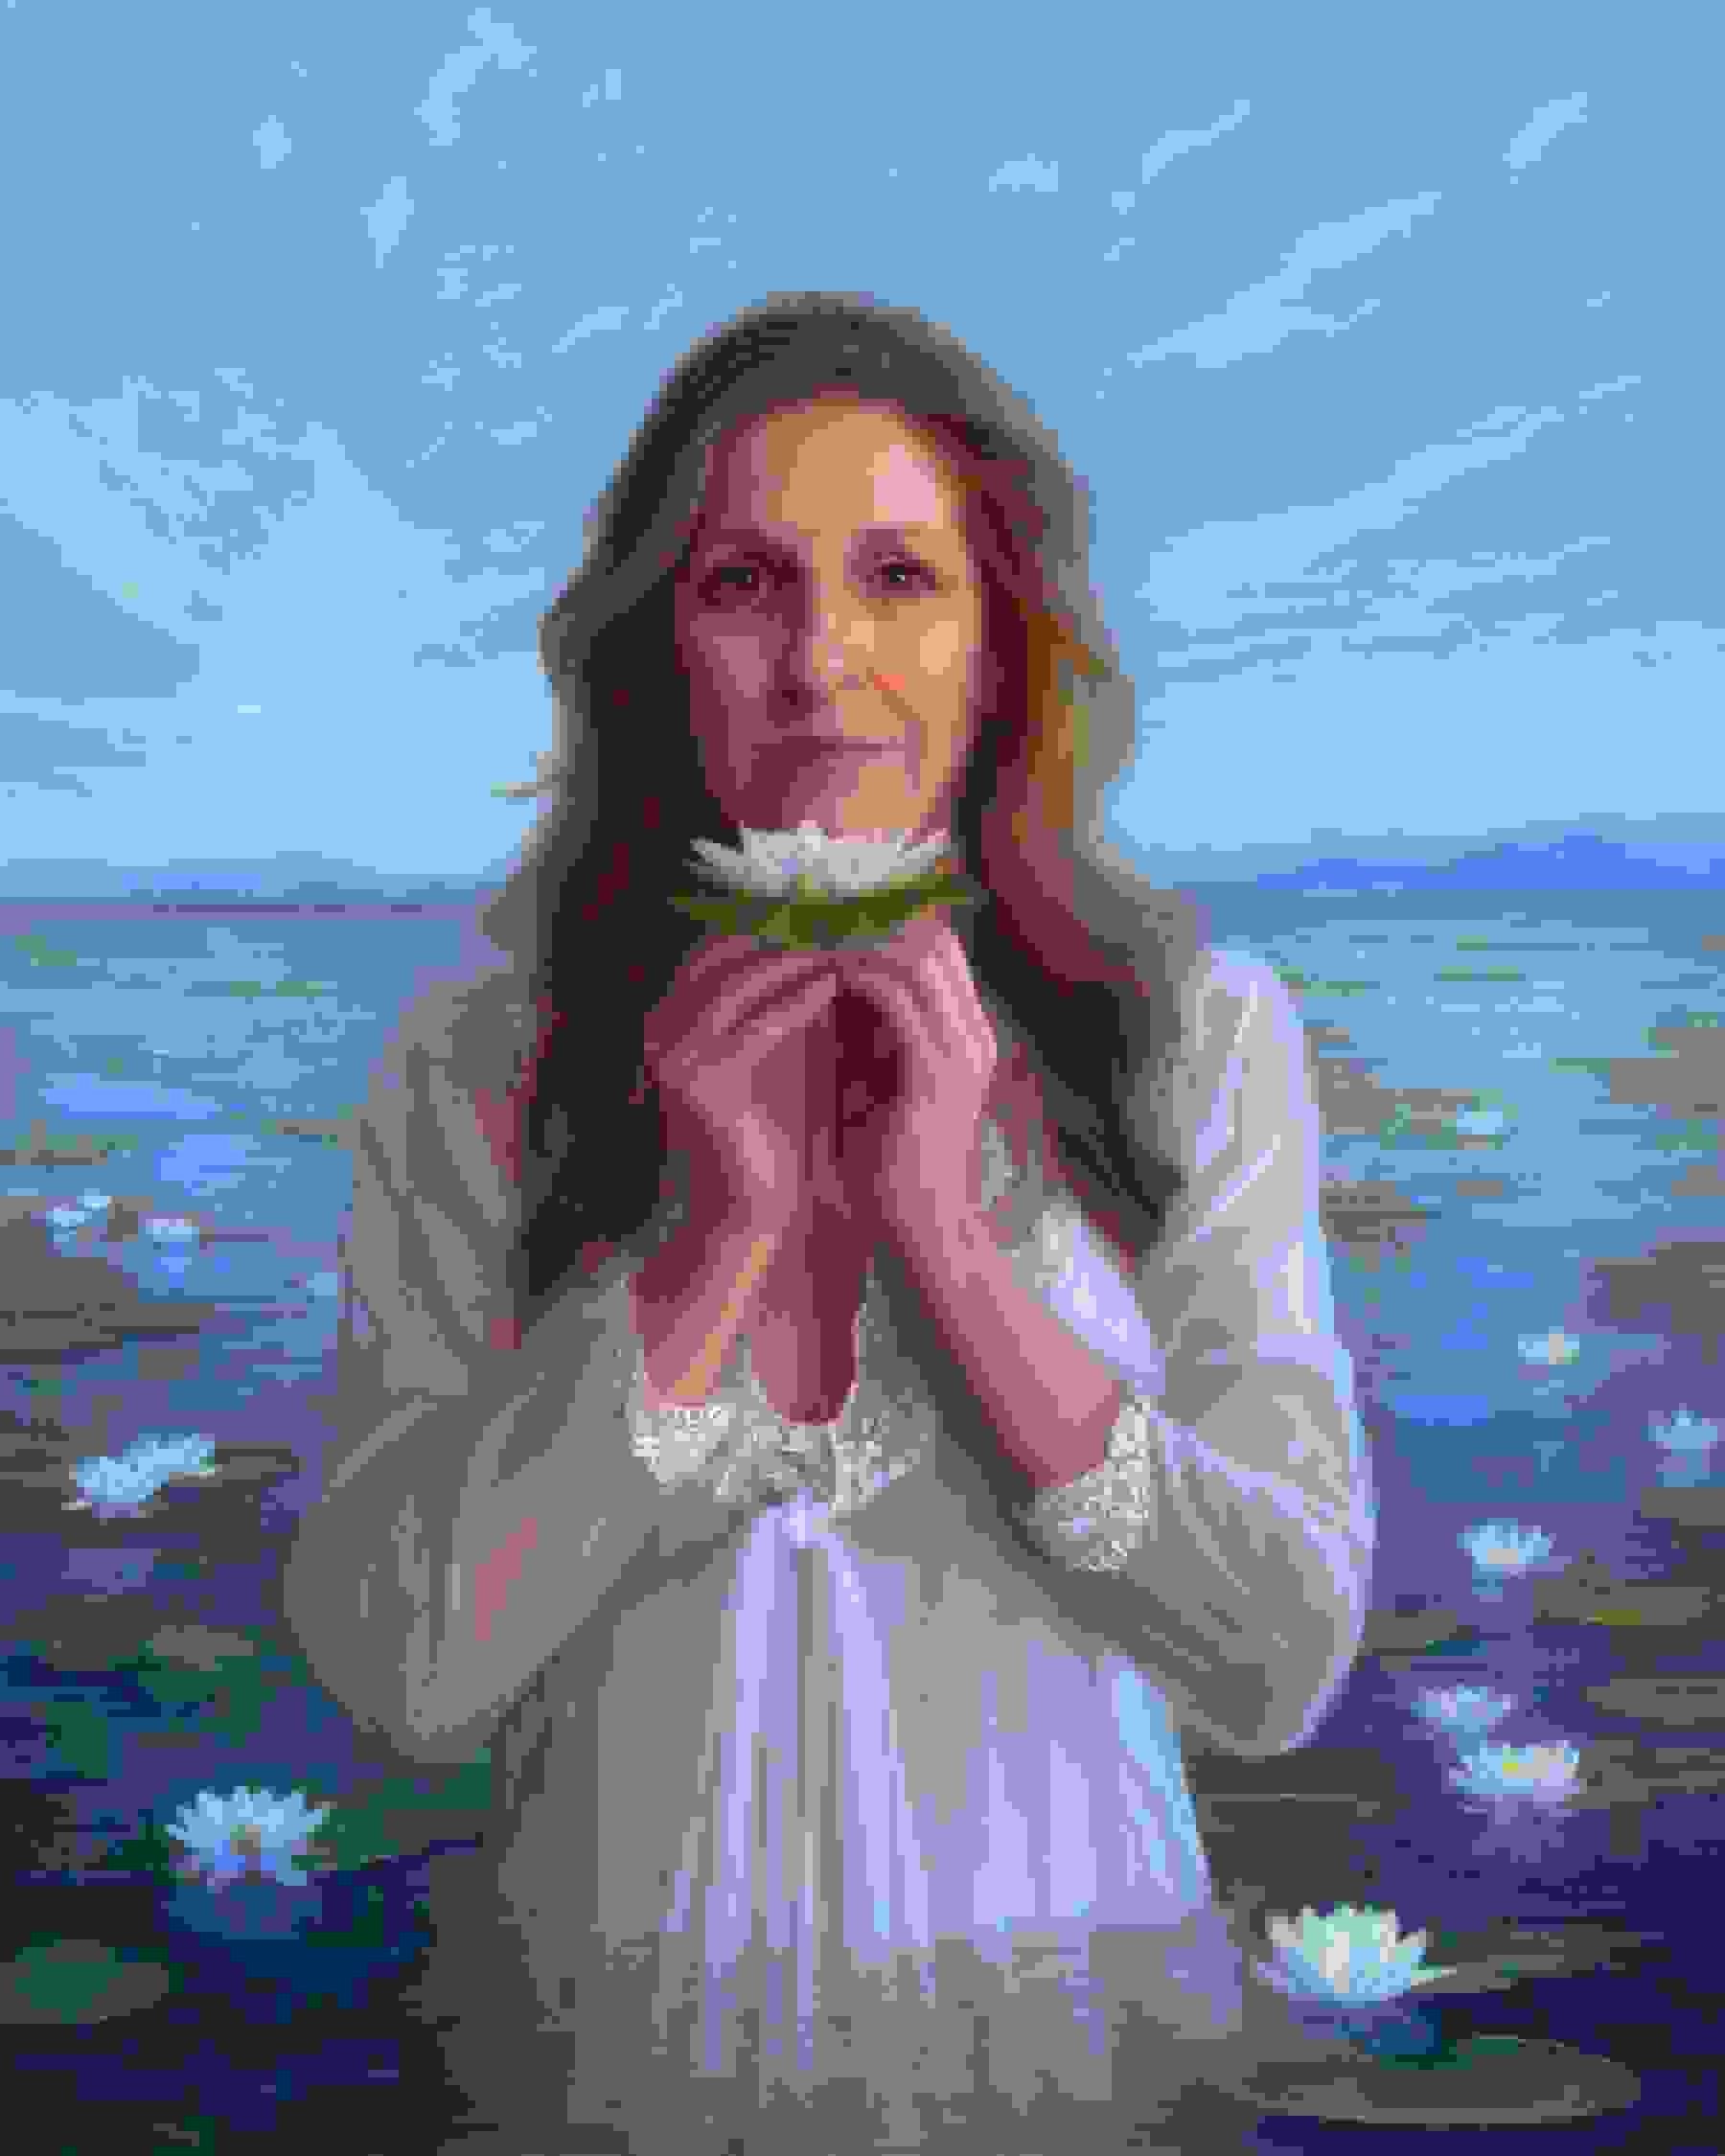 A woman with long, brown hair standing in a body of water that seems to be infinite, surrounded by water lilies. She is holding a water lily in her hands.